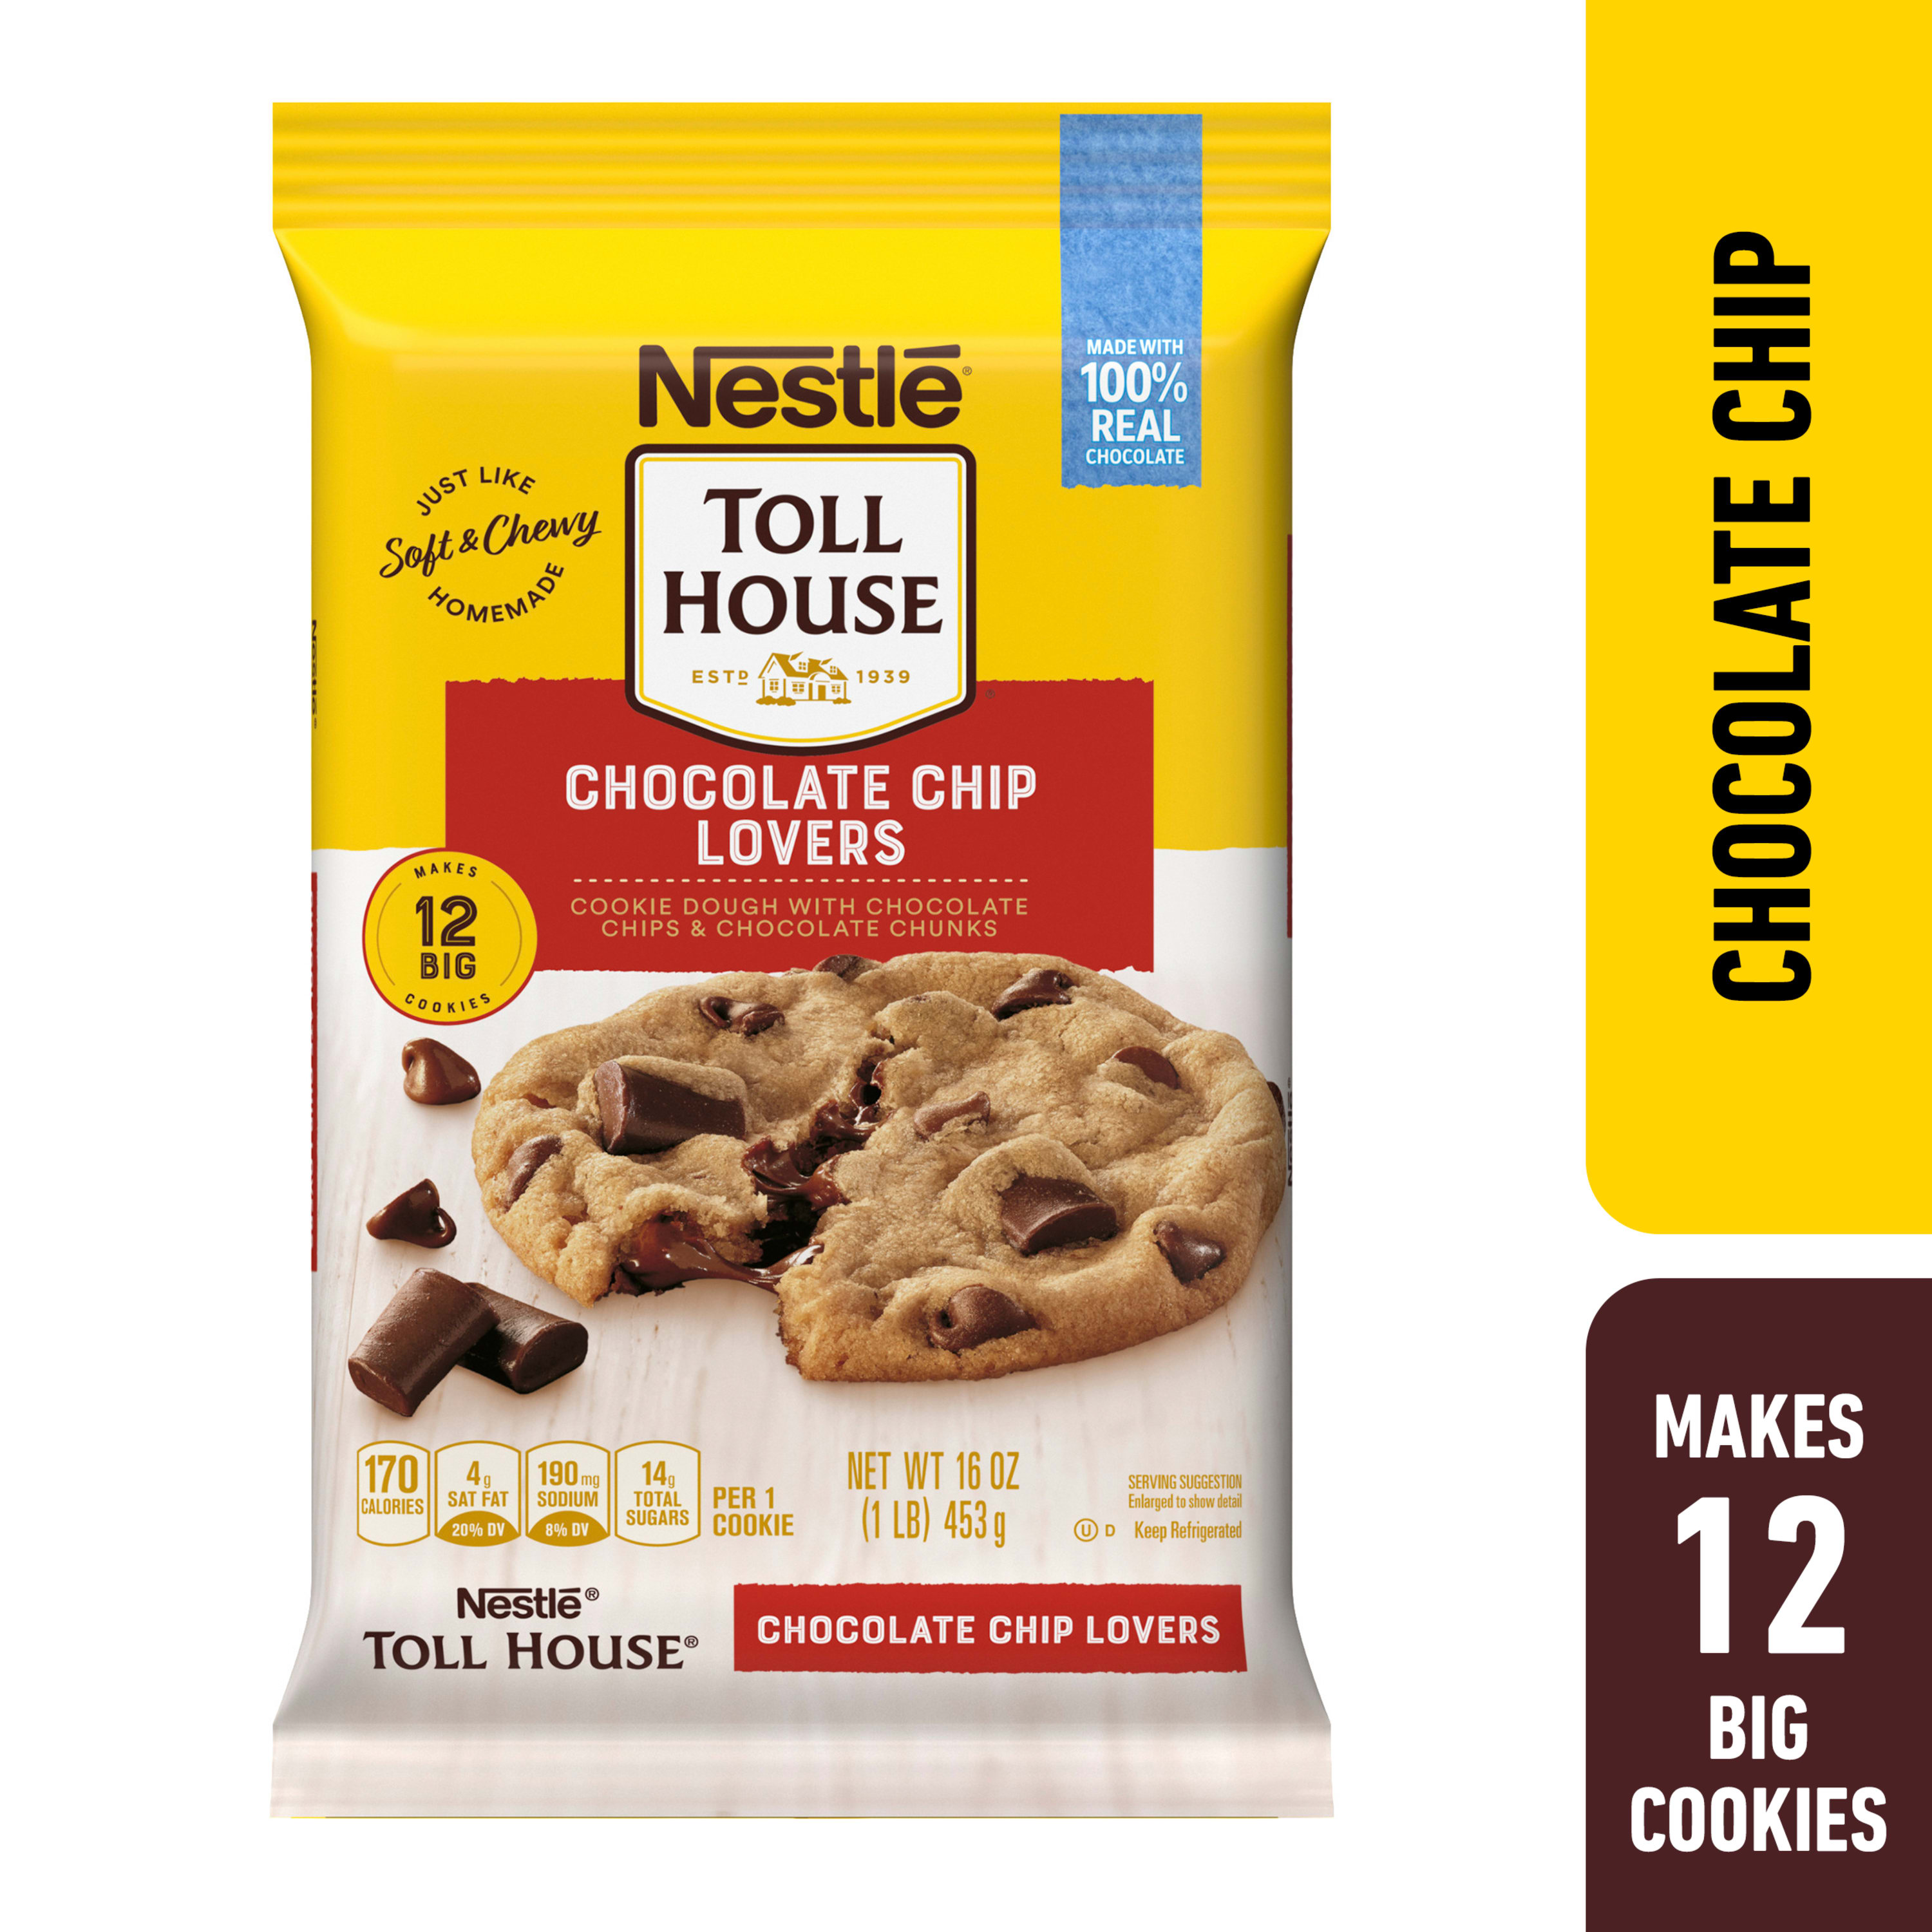 Nestle Toll House Chocolate Chip Lovers Cookie Dough, 16 oz, Makes 12 Giant Cookies - image 1 of 10